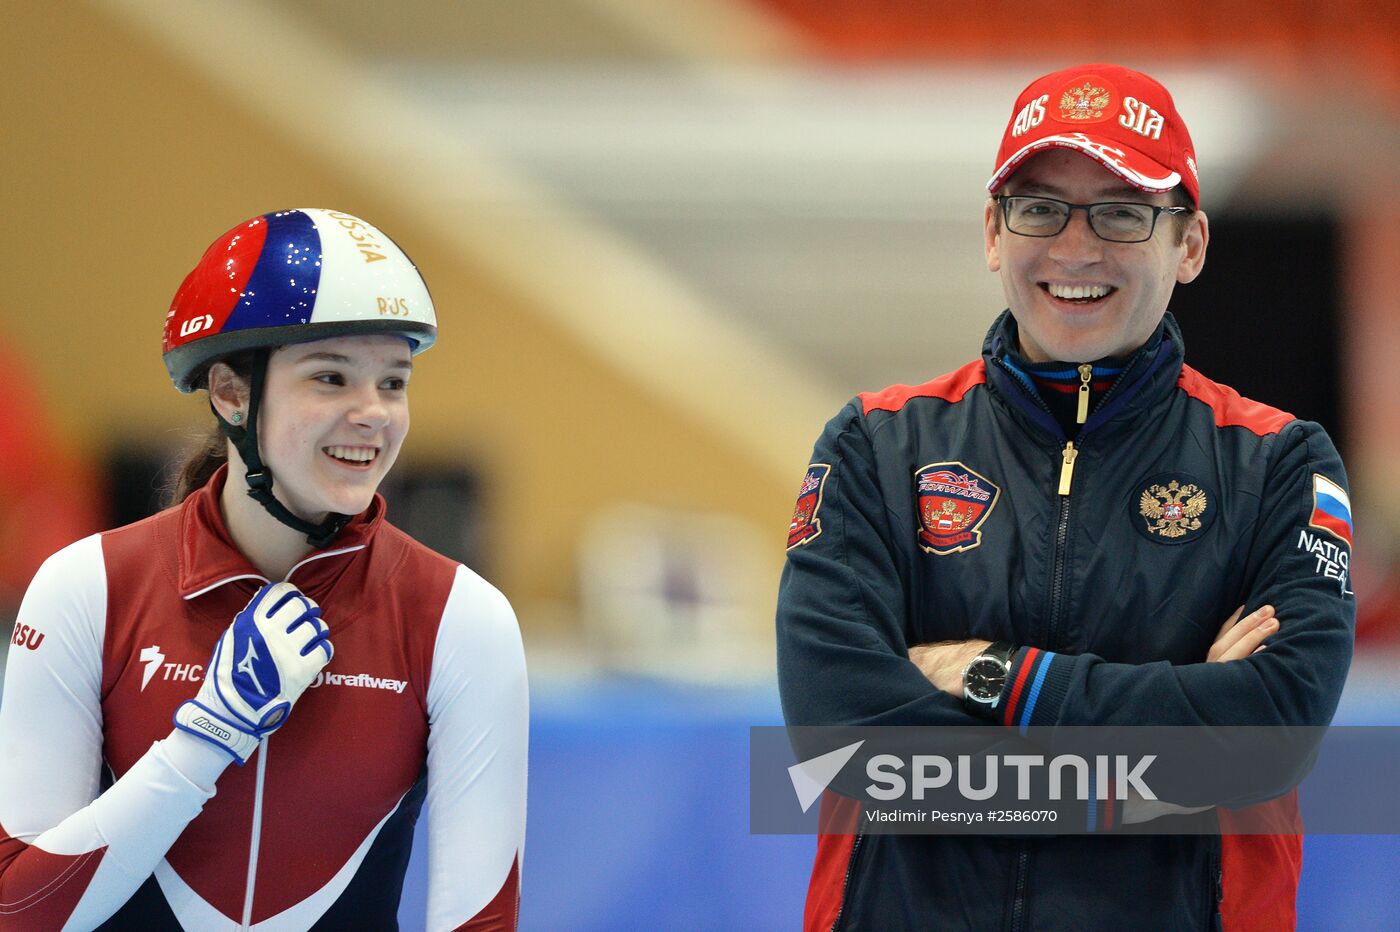 World Short Track Speed Skating Championships 2015 in Moscow. Training